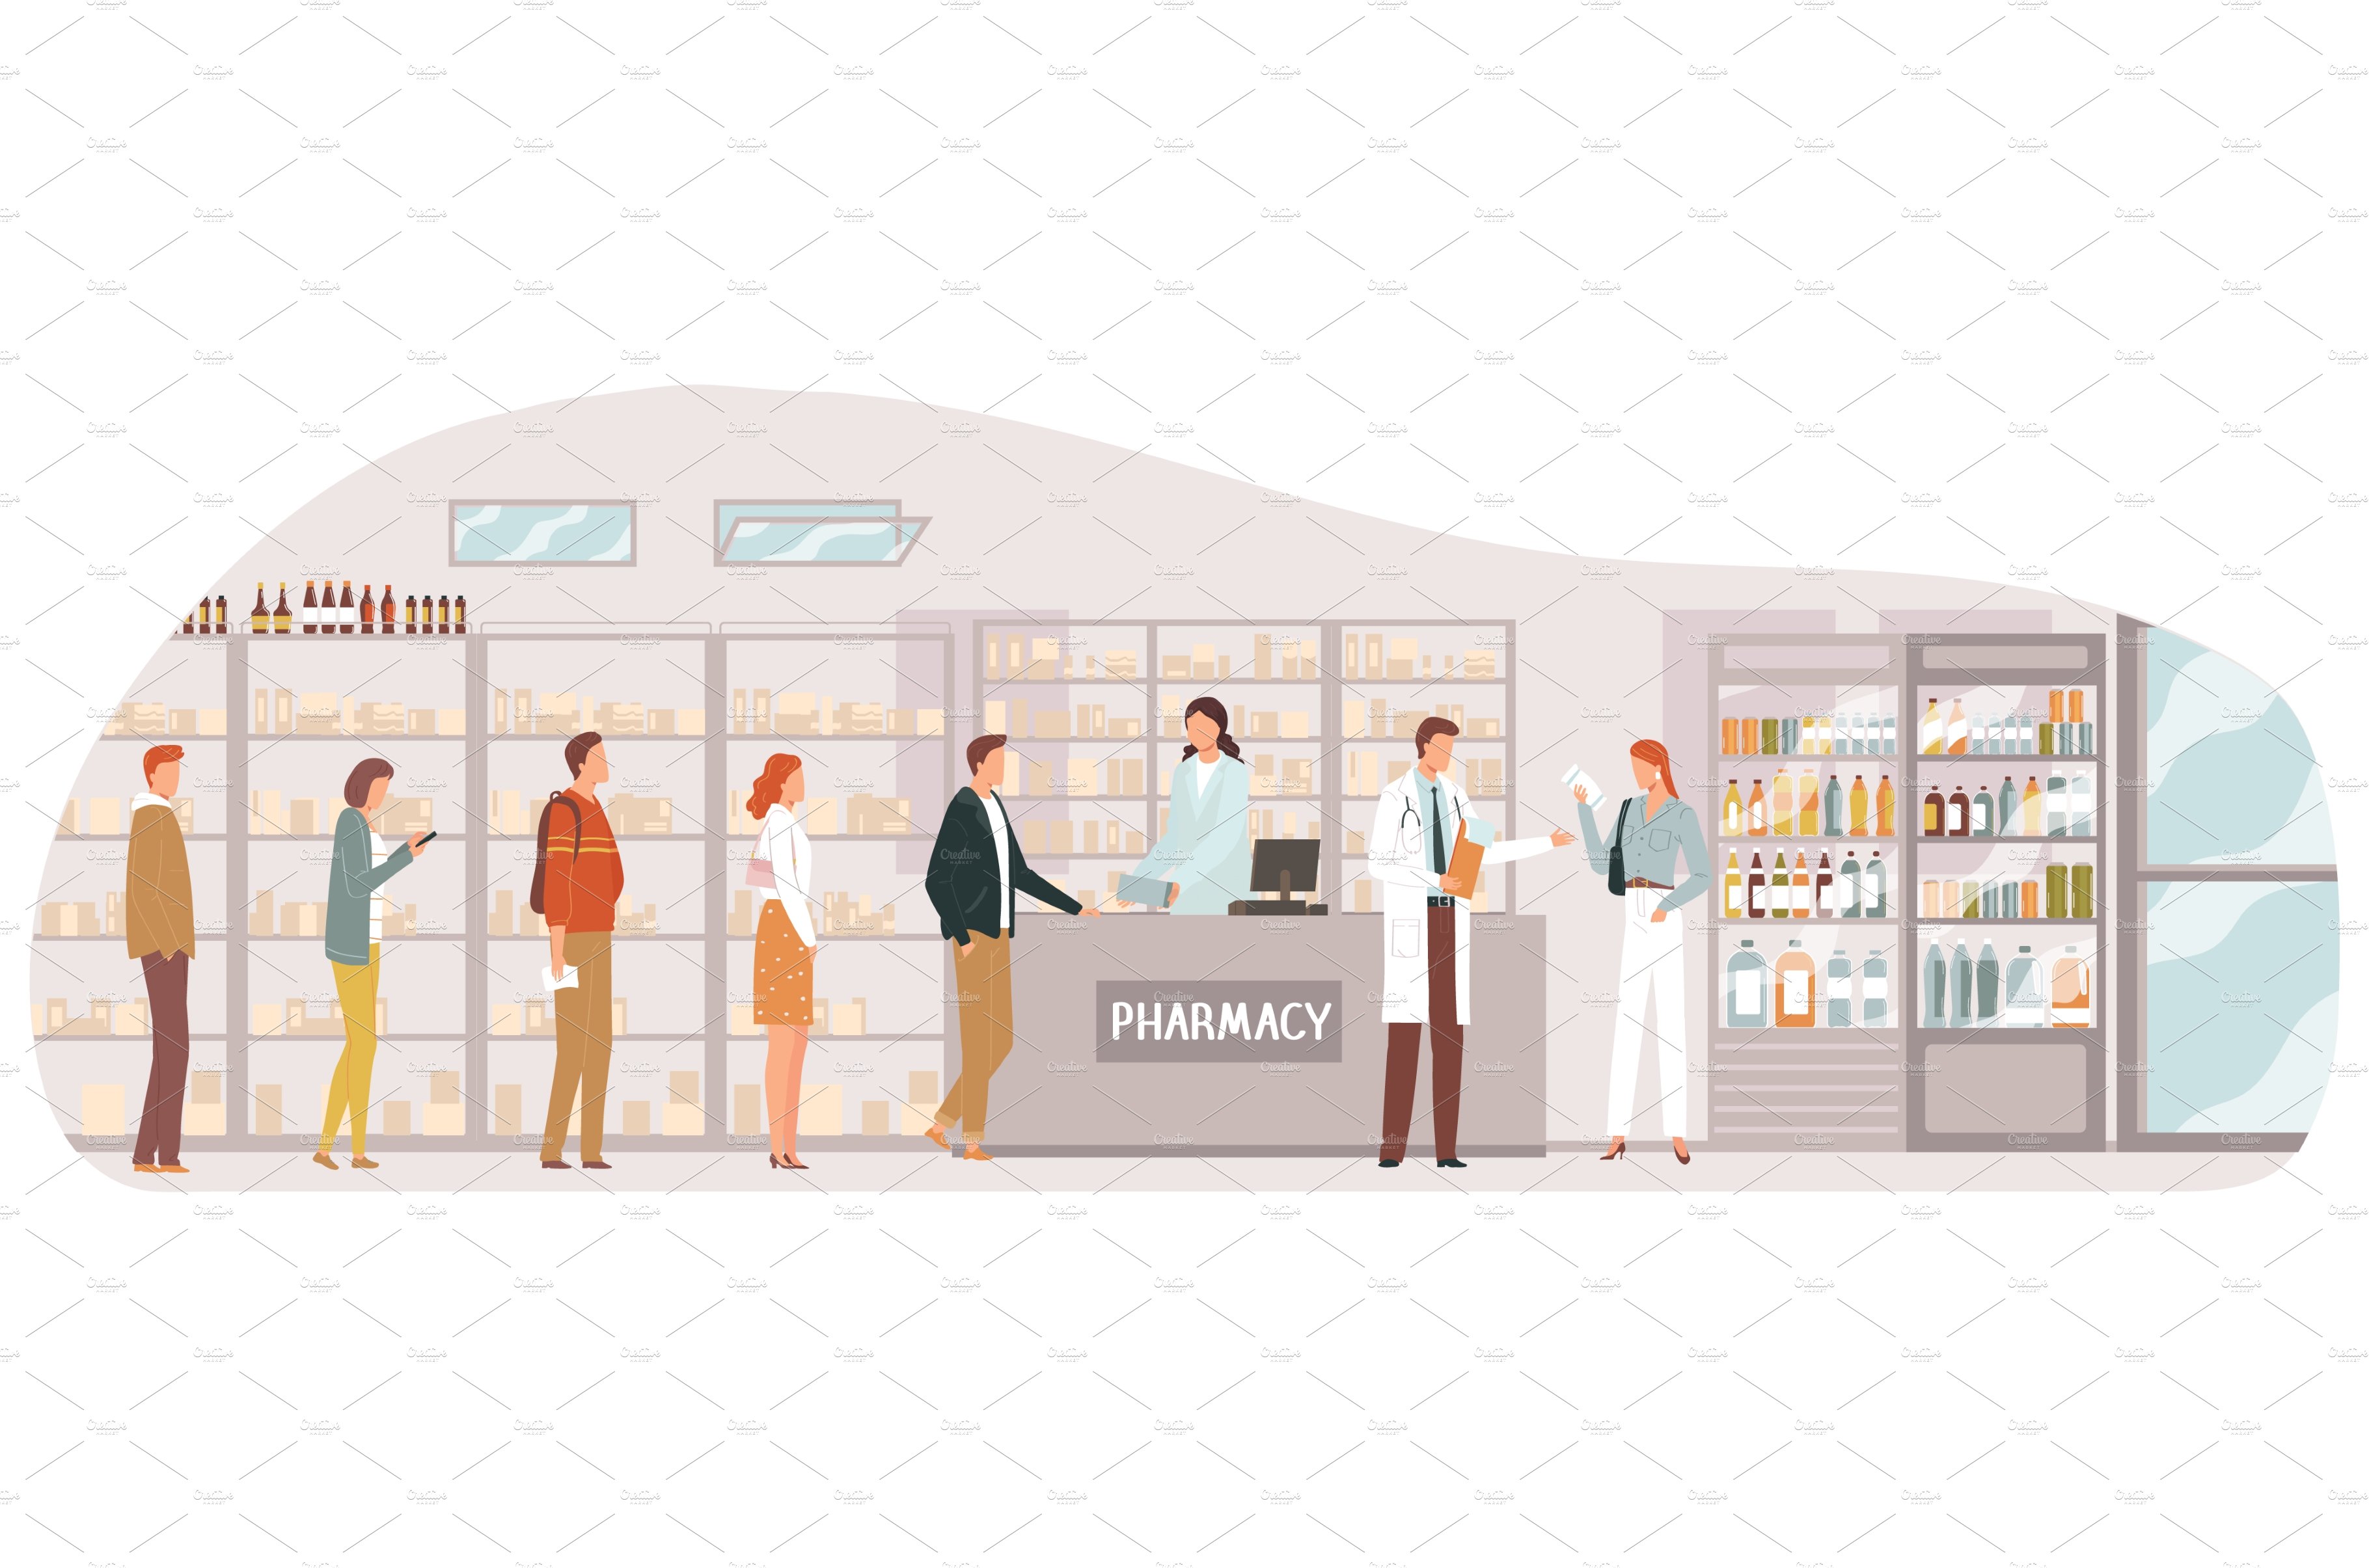 Pharmacy queue people, medical cover image.